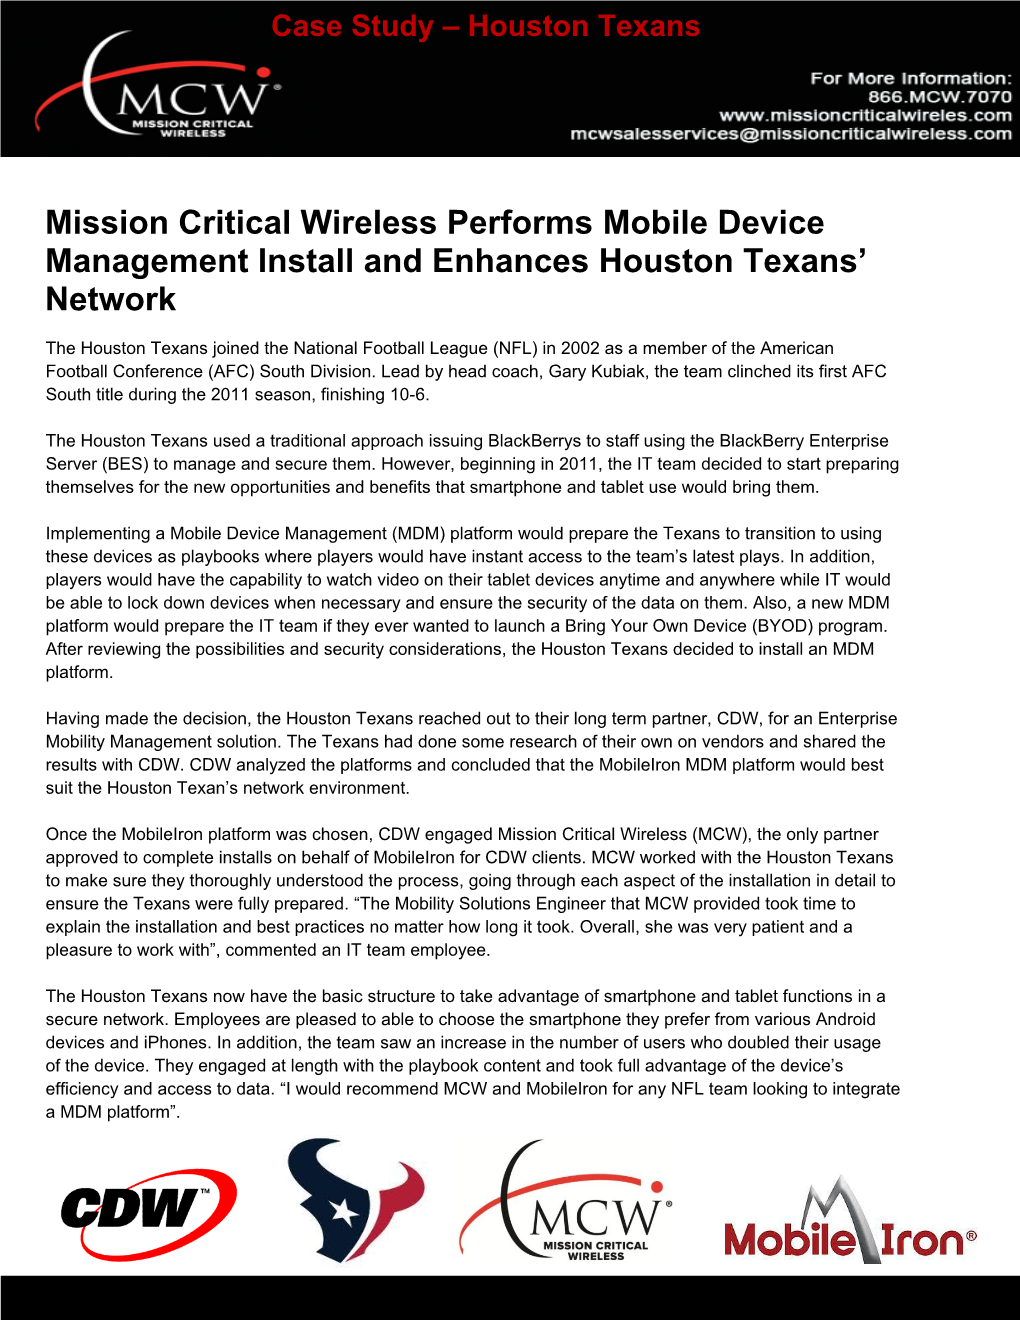 Mission Critical Wireless Performs Mobile Device Management Install and Enhances Houston Texans’ Network